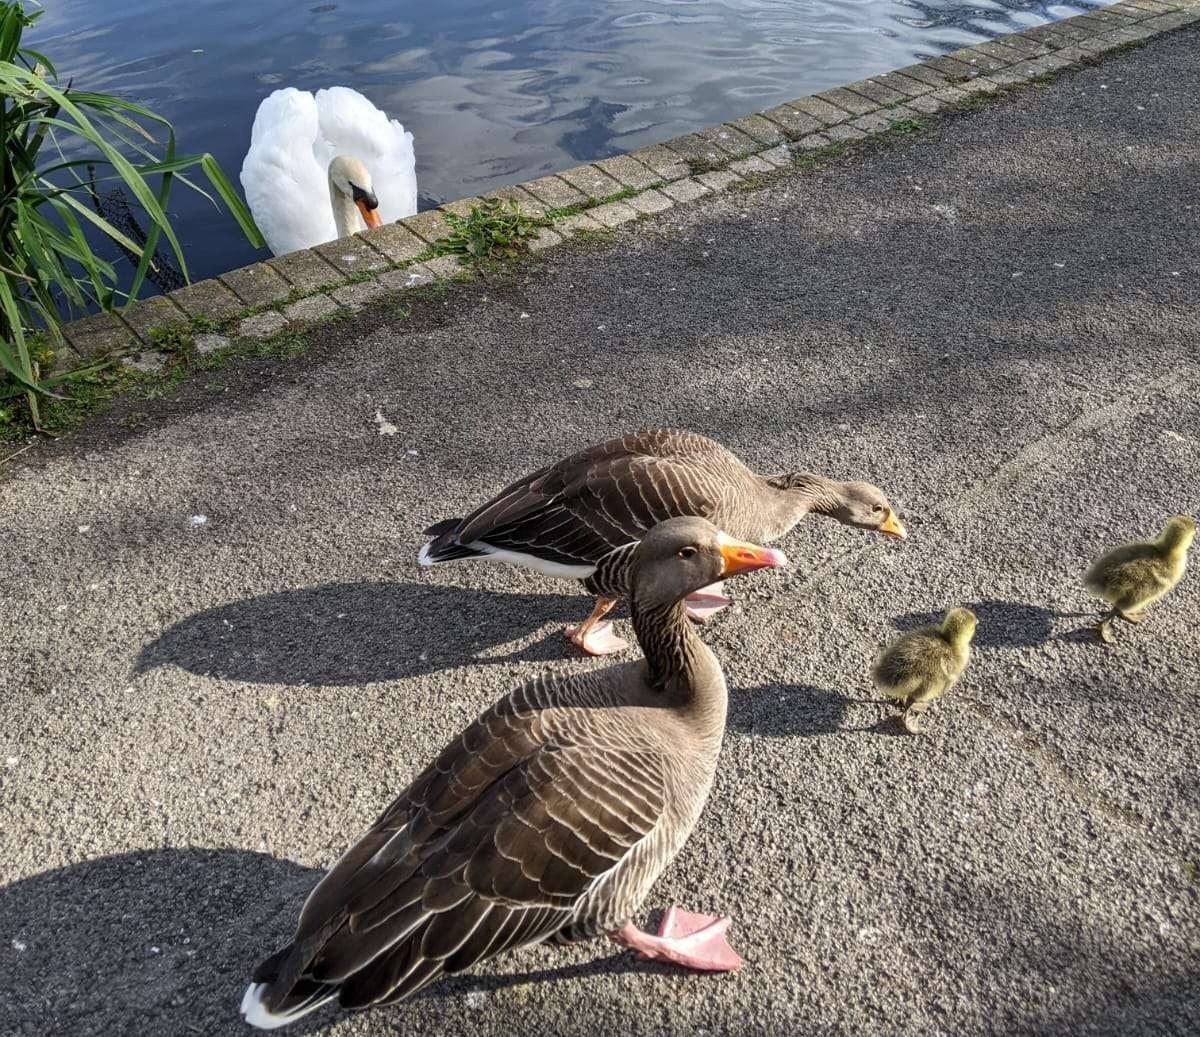 Sussex News - Dramatic Queens Park Gosling Rescue Amid Swan Attacks